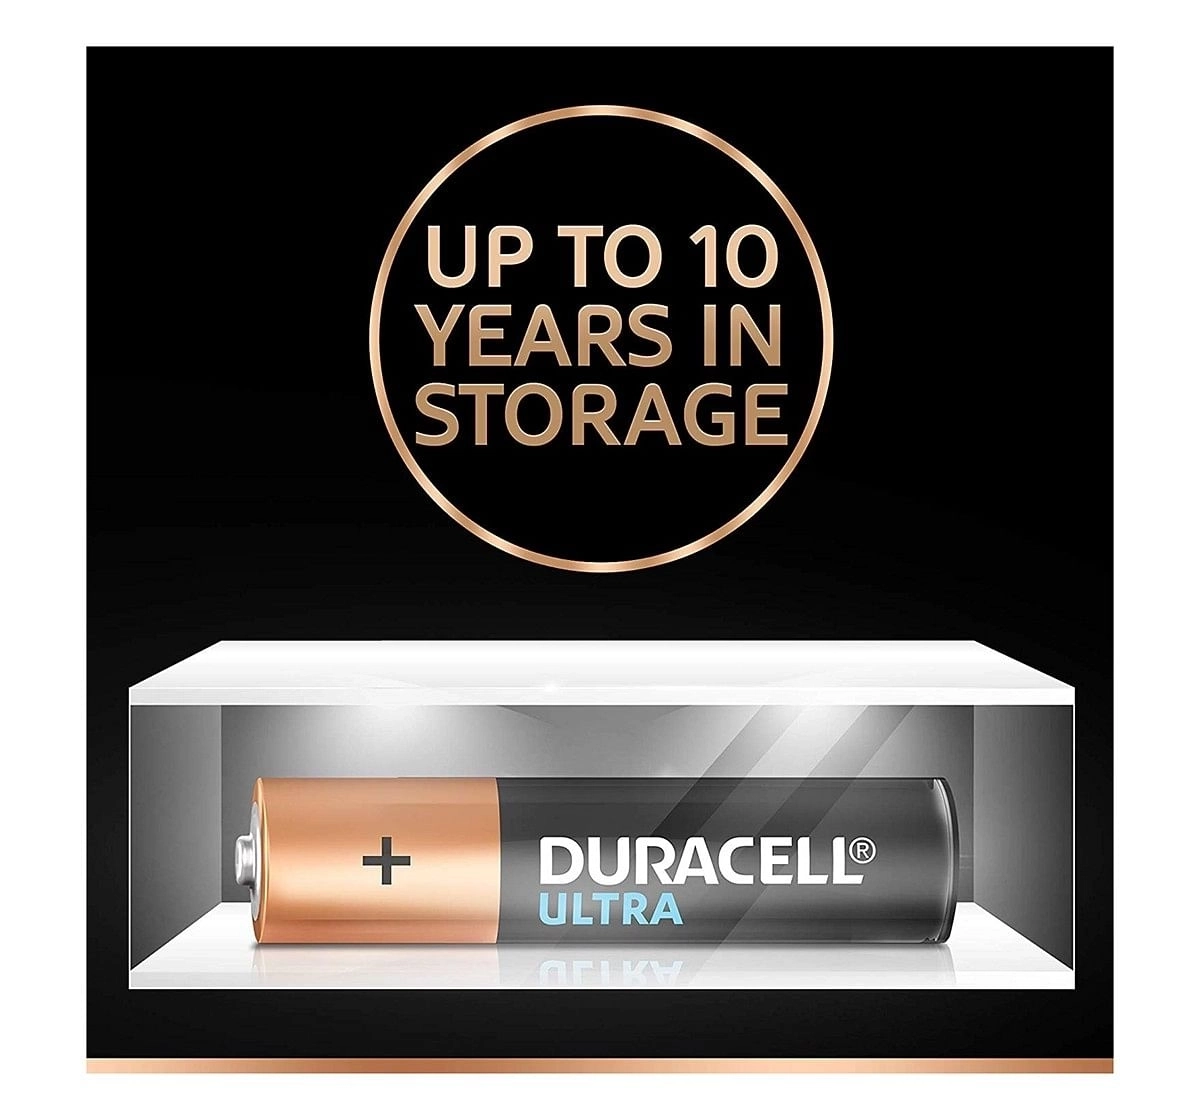 Duracell Alkaline AAA Batteries - Pack of 4 Essentials for Kids age 3Y+ 